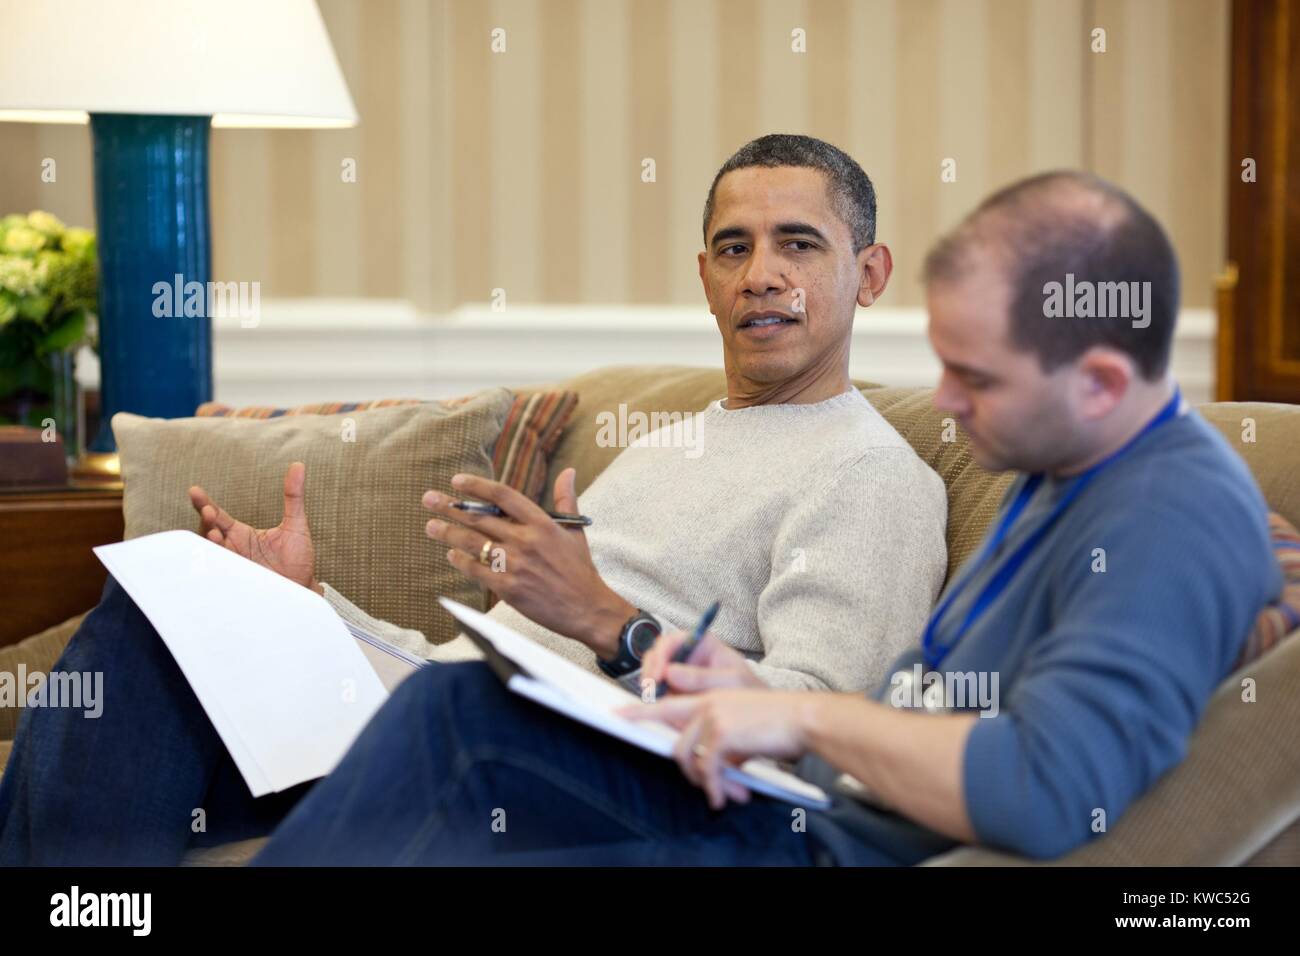 President Obama with Ben Rhodes, Deputy National Security Advisor for Strategic Communications. They are working on Obama's speech to the American Israel Public Affairs Committee (AIPAC) on Saturday, March, 3, 2012, in the Oval Office. (BSLOC 2015 13 254) Stock Photo